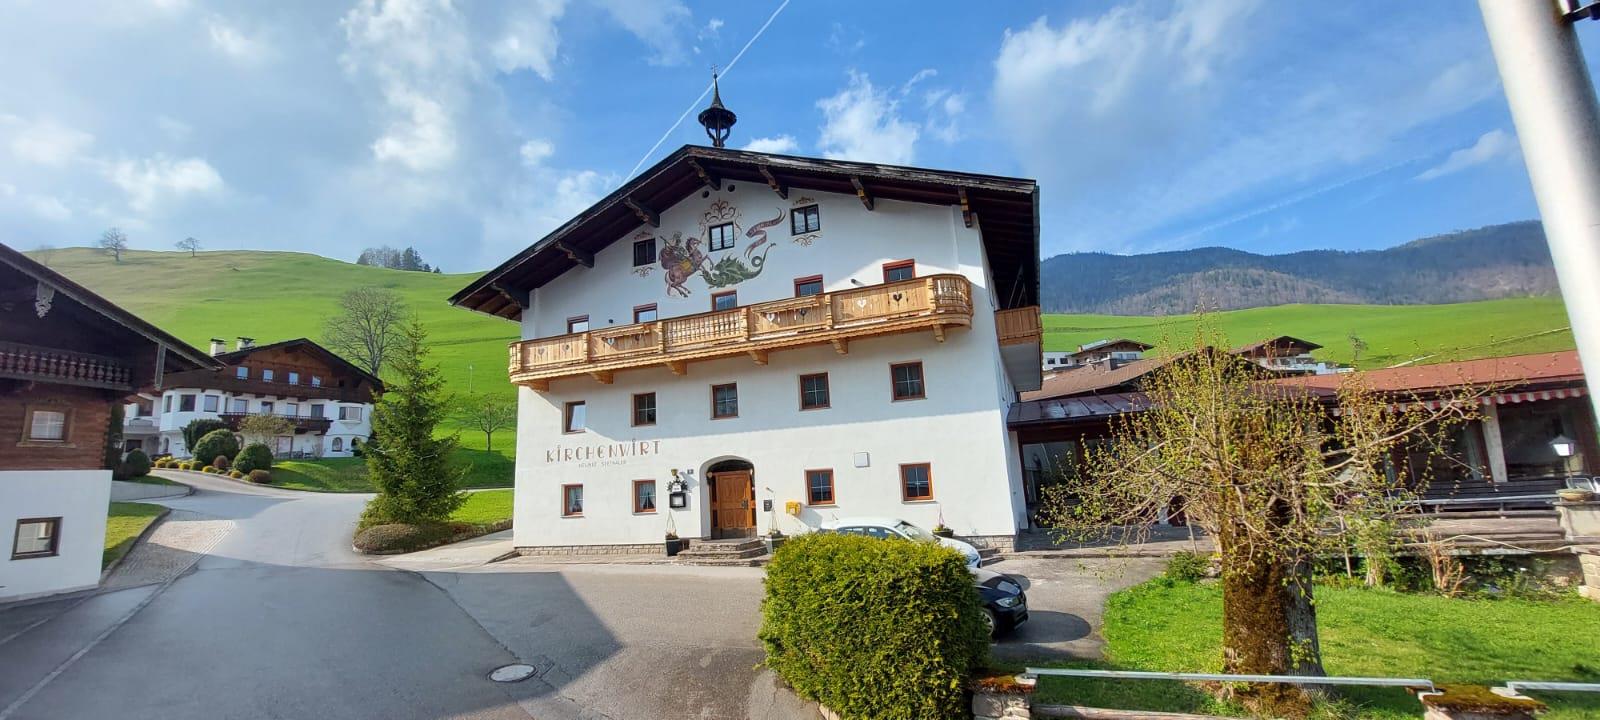 Holiday apartment for 4 - Kufstein